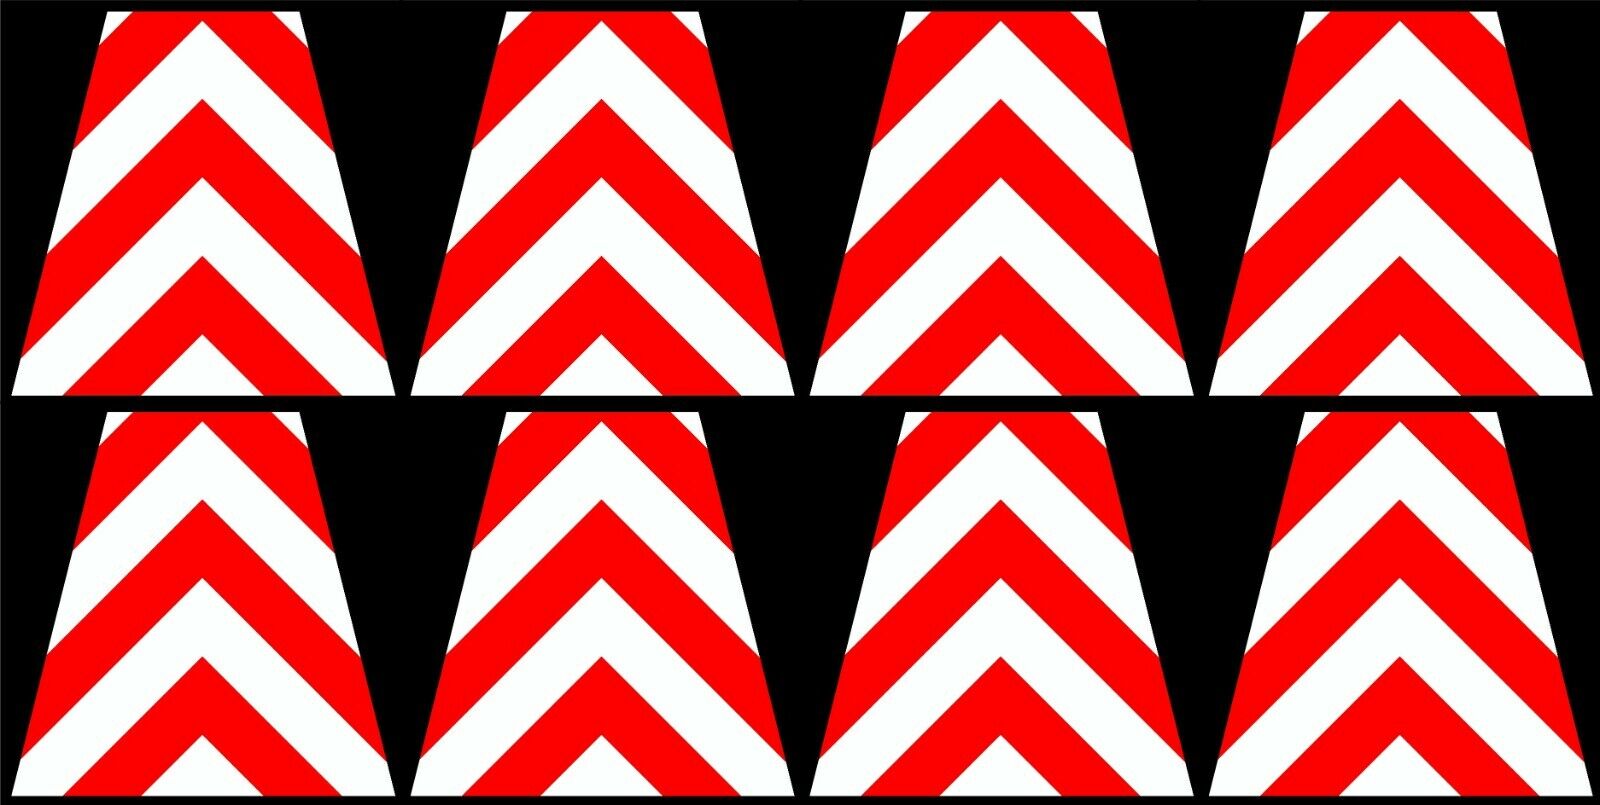 8 Fully Reflective Red and White Chevron Fire Helmet Tetrahedrons Tets Trapezoid